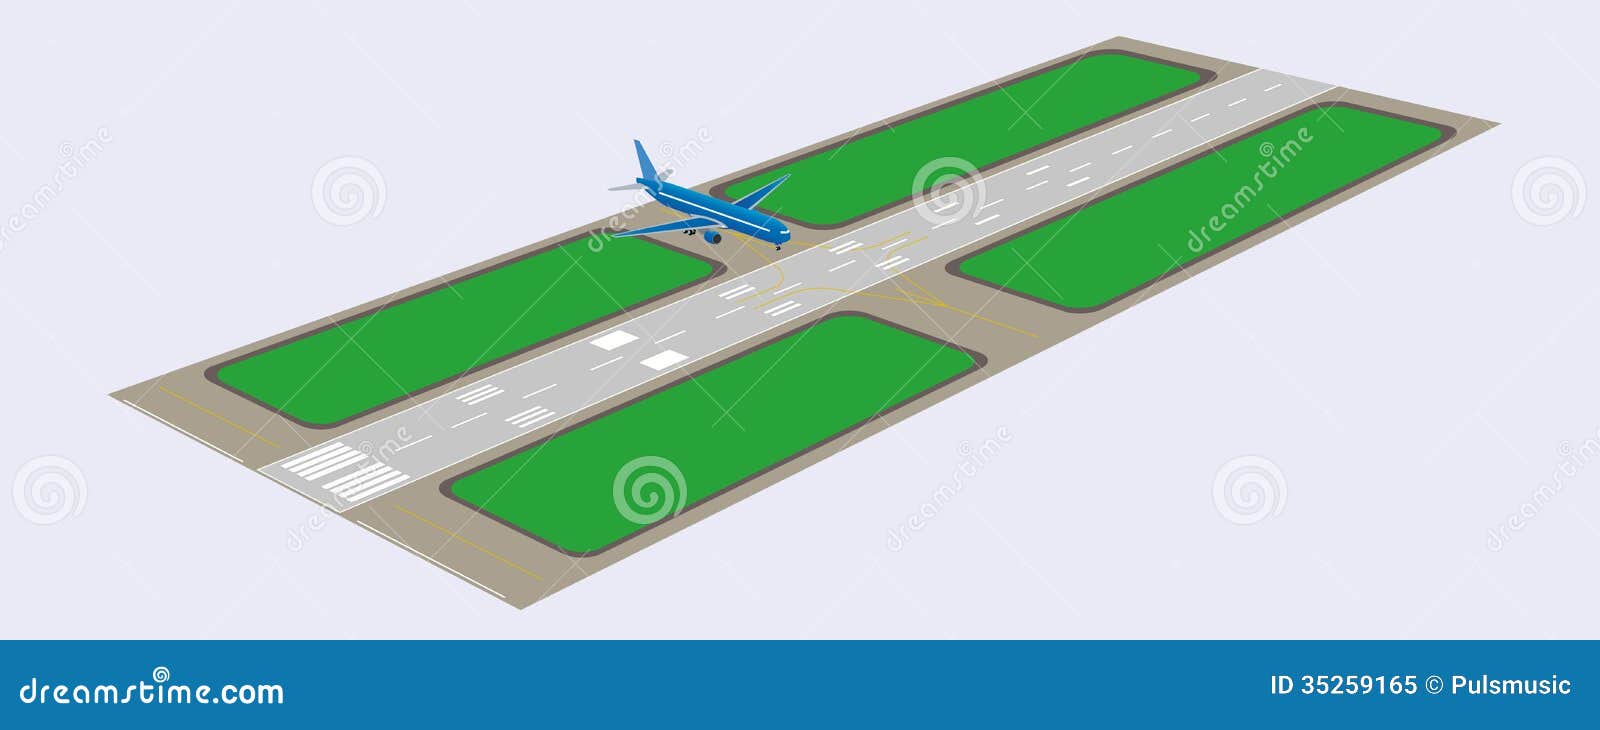 clipart airport free - photo #26